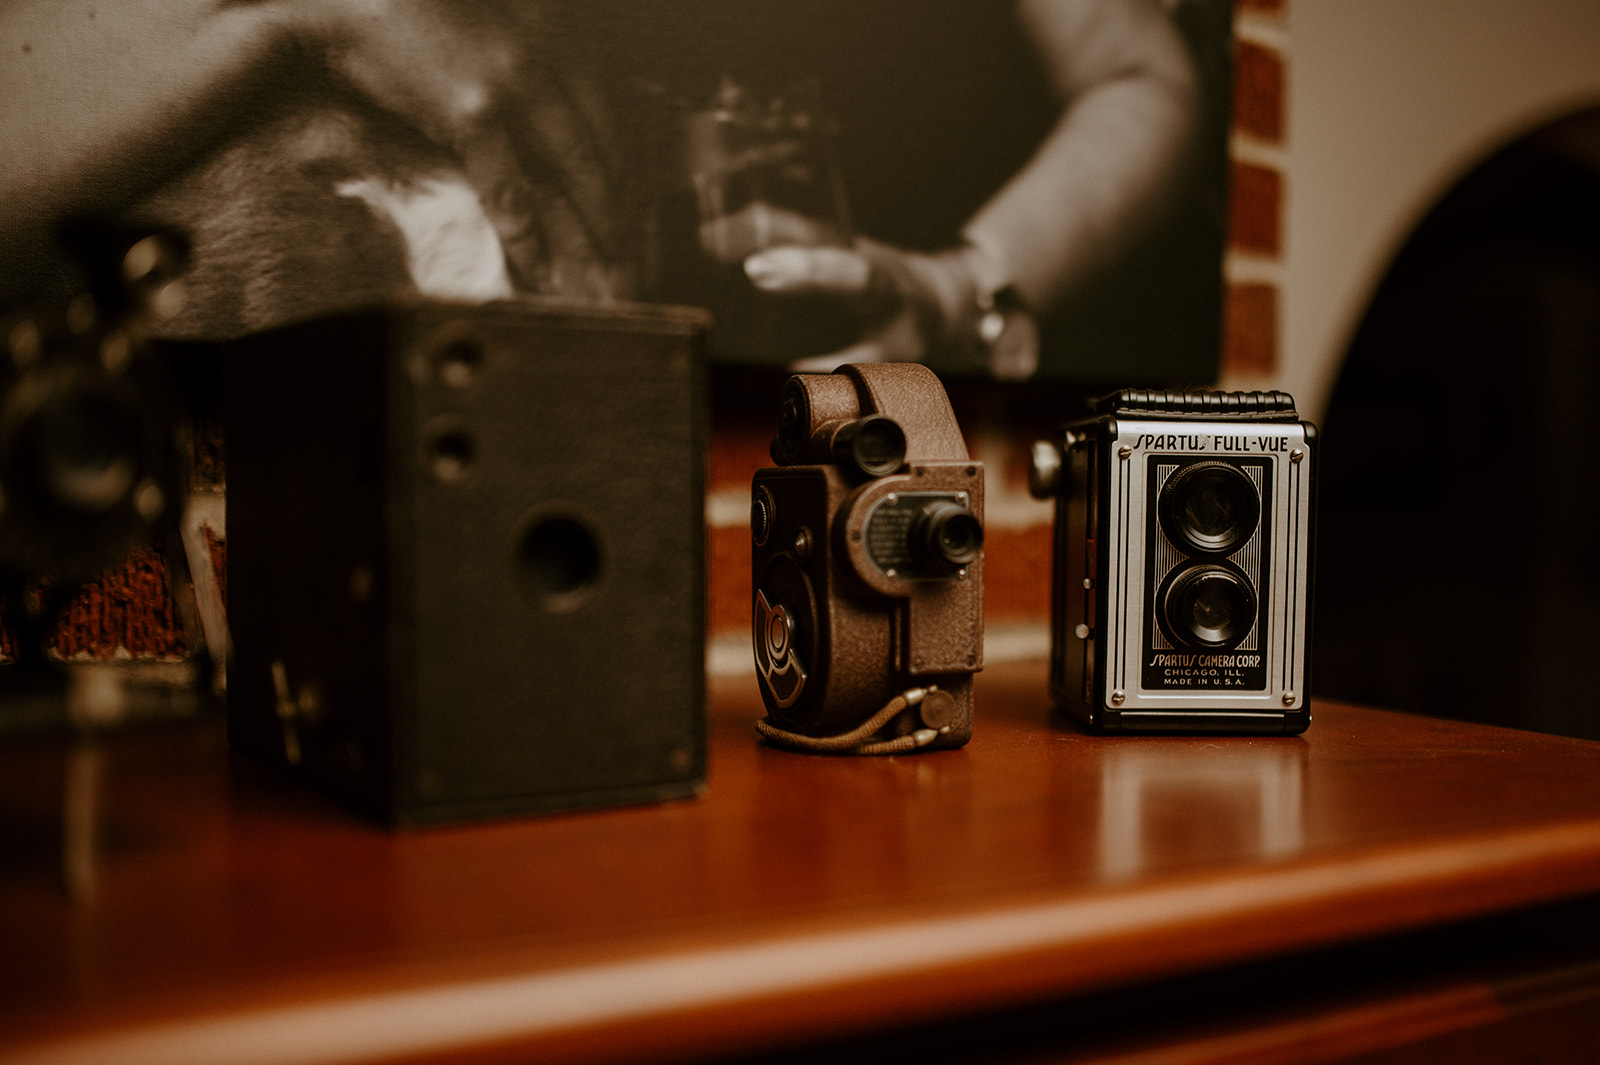 A photo of old cameras collected by the photographer. Not easy to use for selfies!